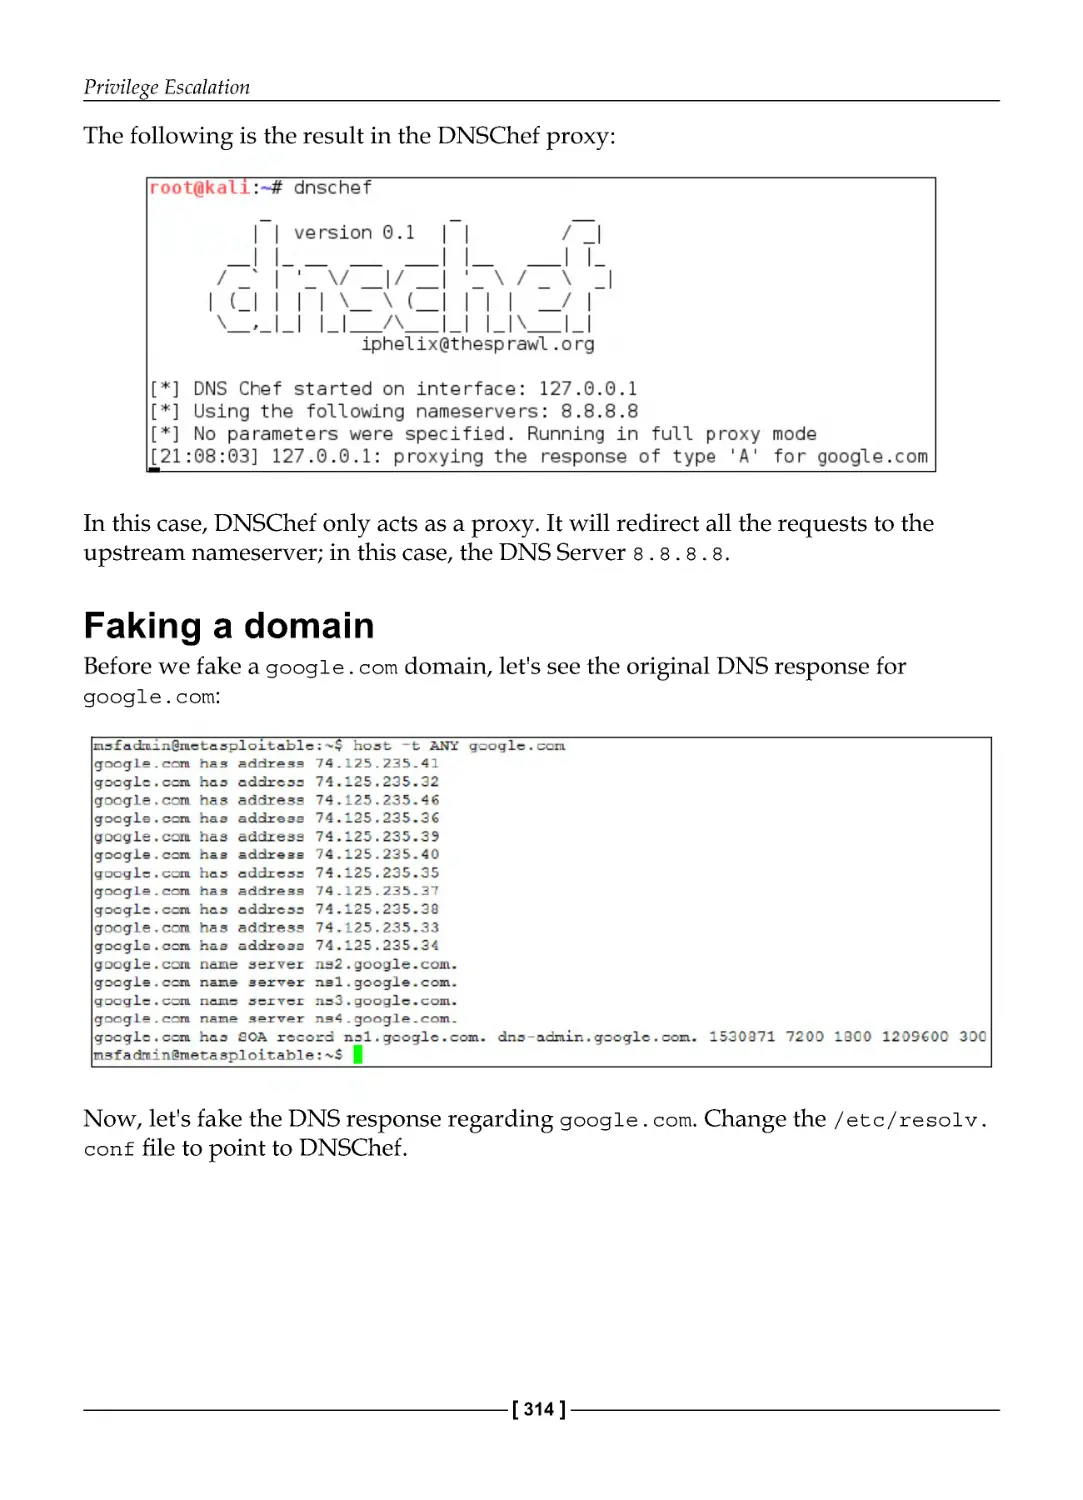 Faking a domain